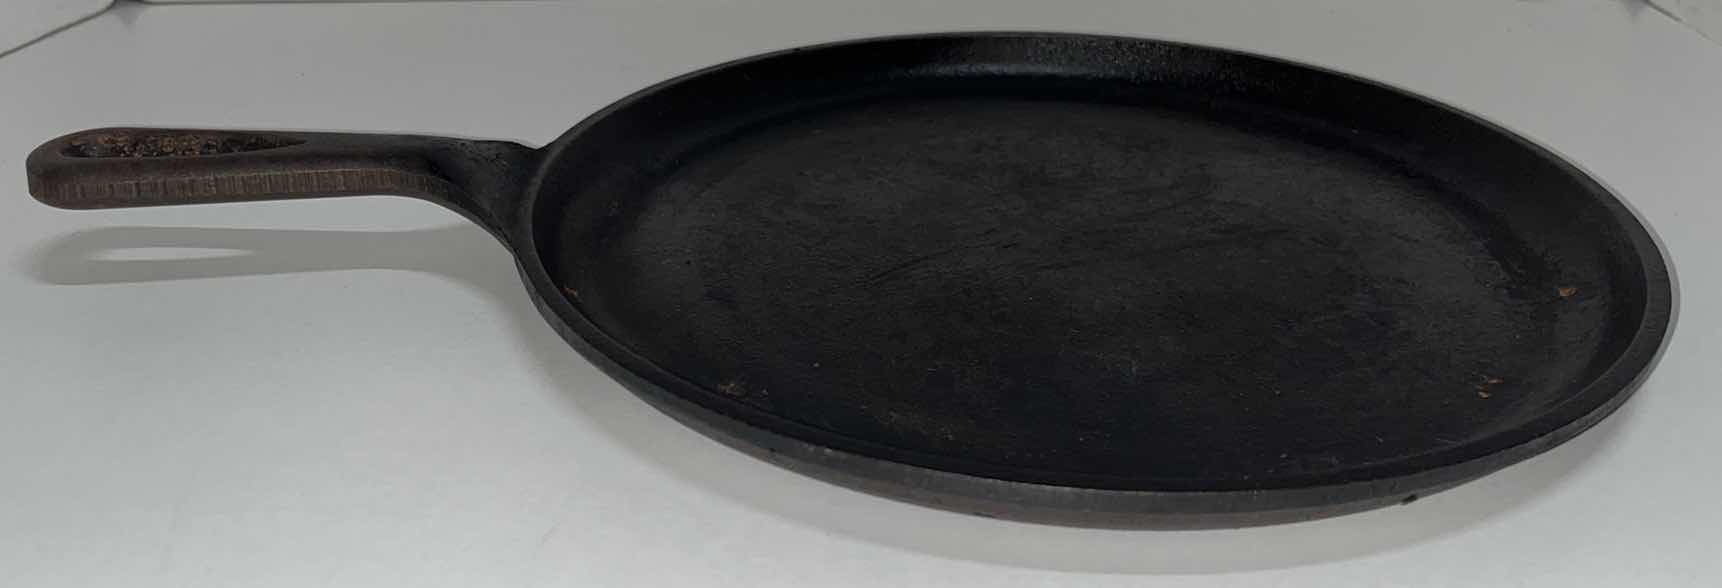 Photo 2 of LODGE USA 90G 10.5” CAST IRON ROUND GRIDDLE FLAT SKILLET PAN & 8 1/8” SKILLET (2)